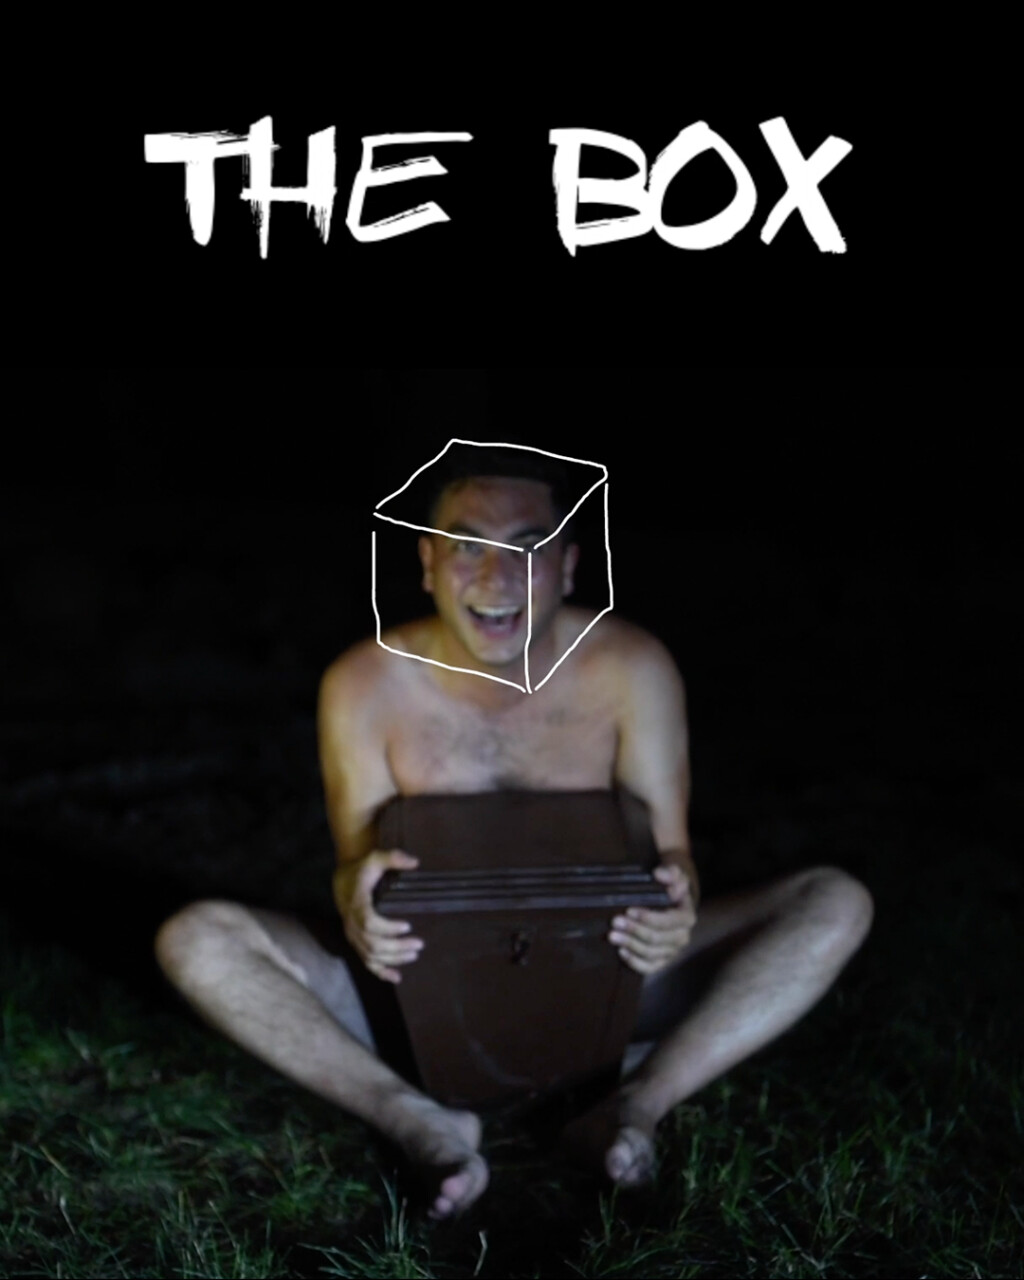 Filmposter for The Box